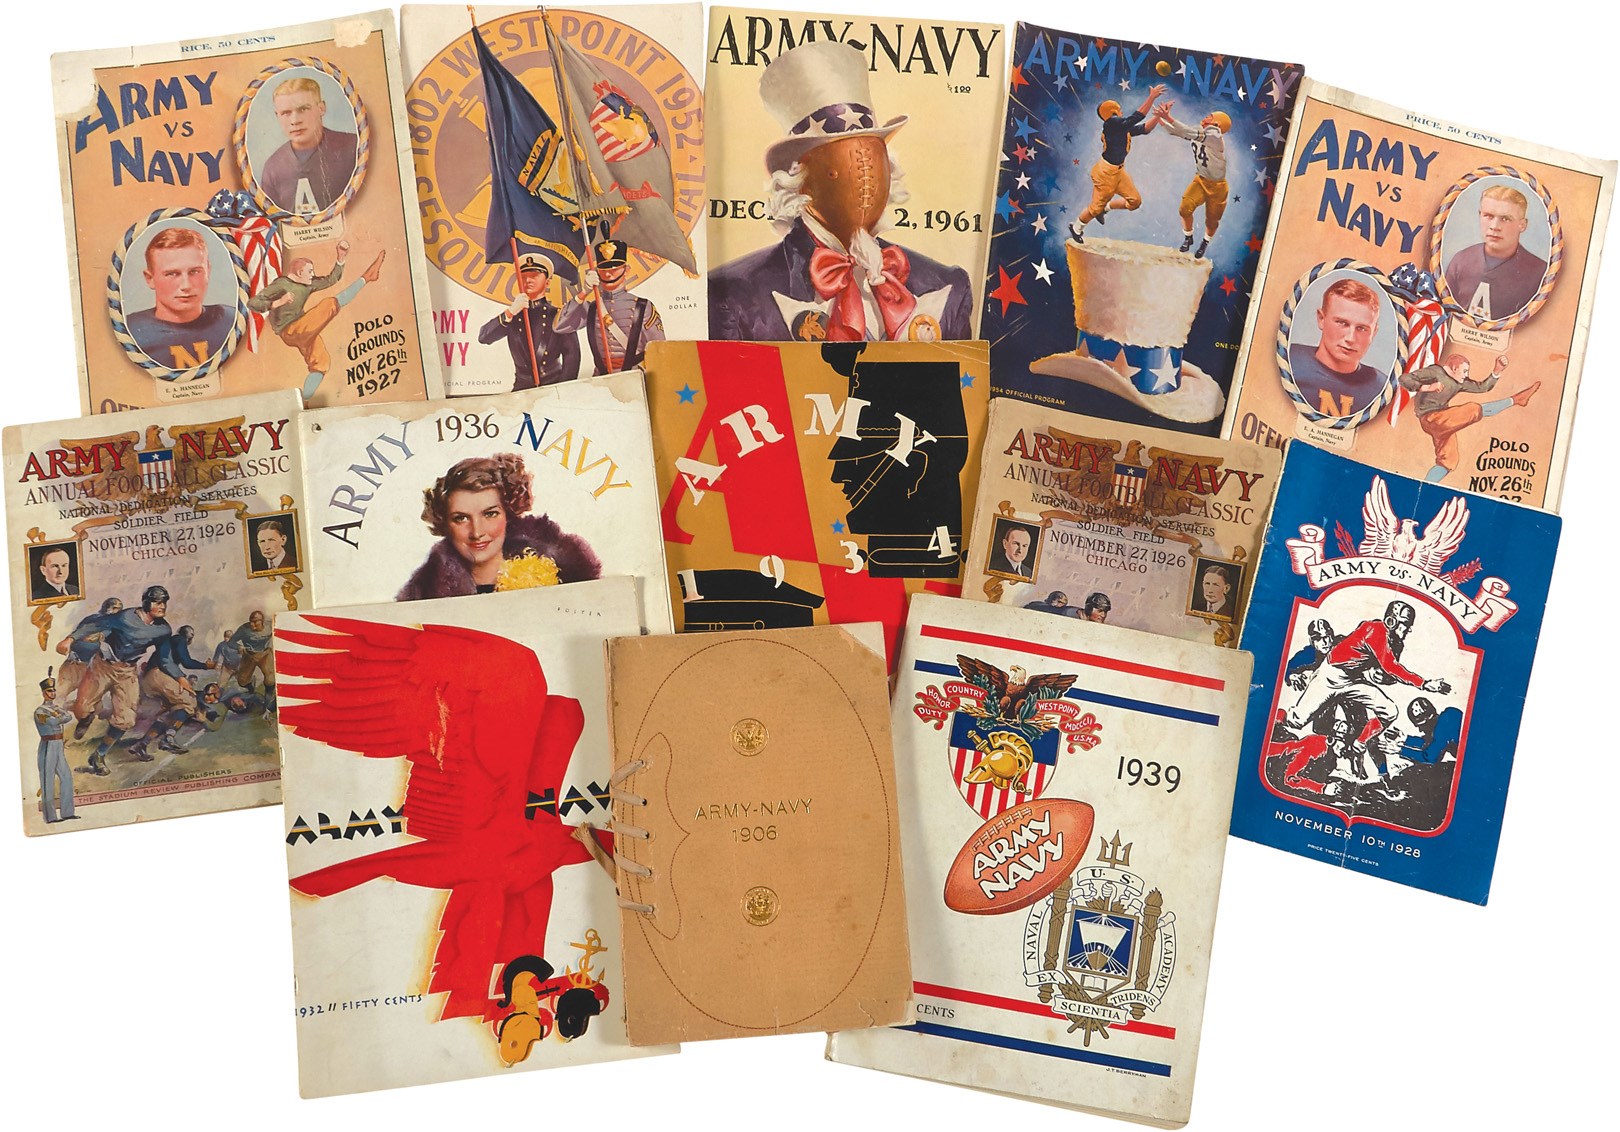 The Ivy League And Collegiate Program Archive - 1906-60s Army vs. Navy Football Rivalry Program Collection (35+)